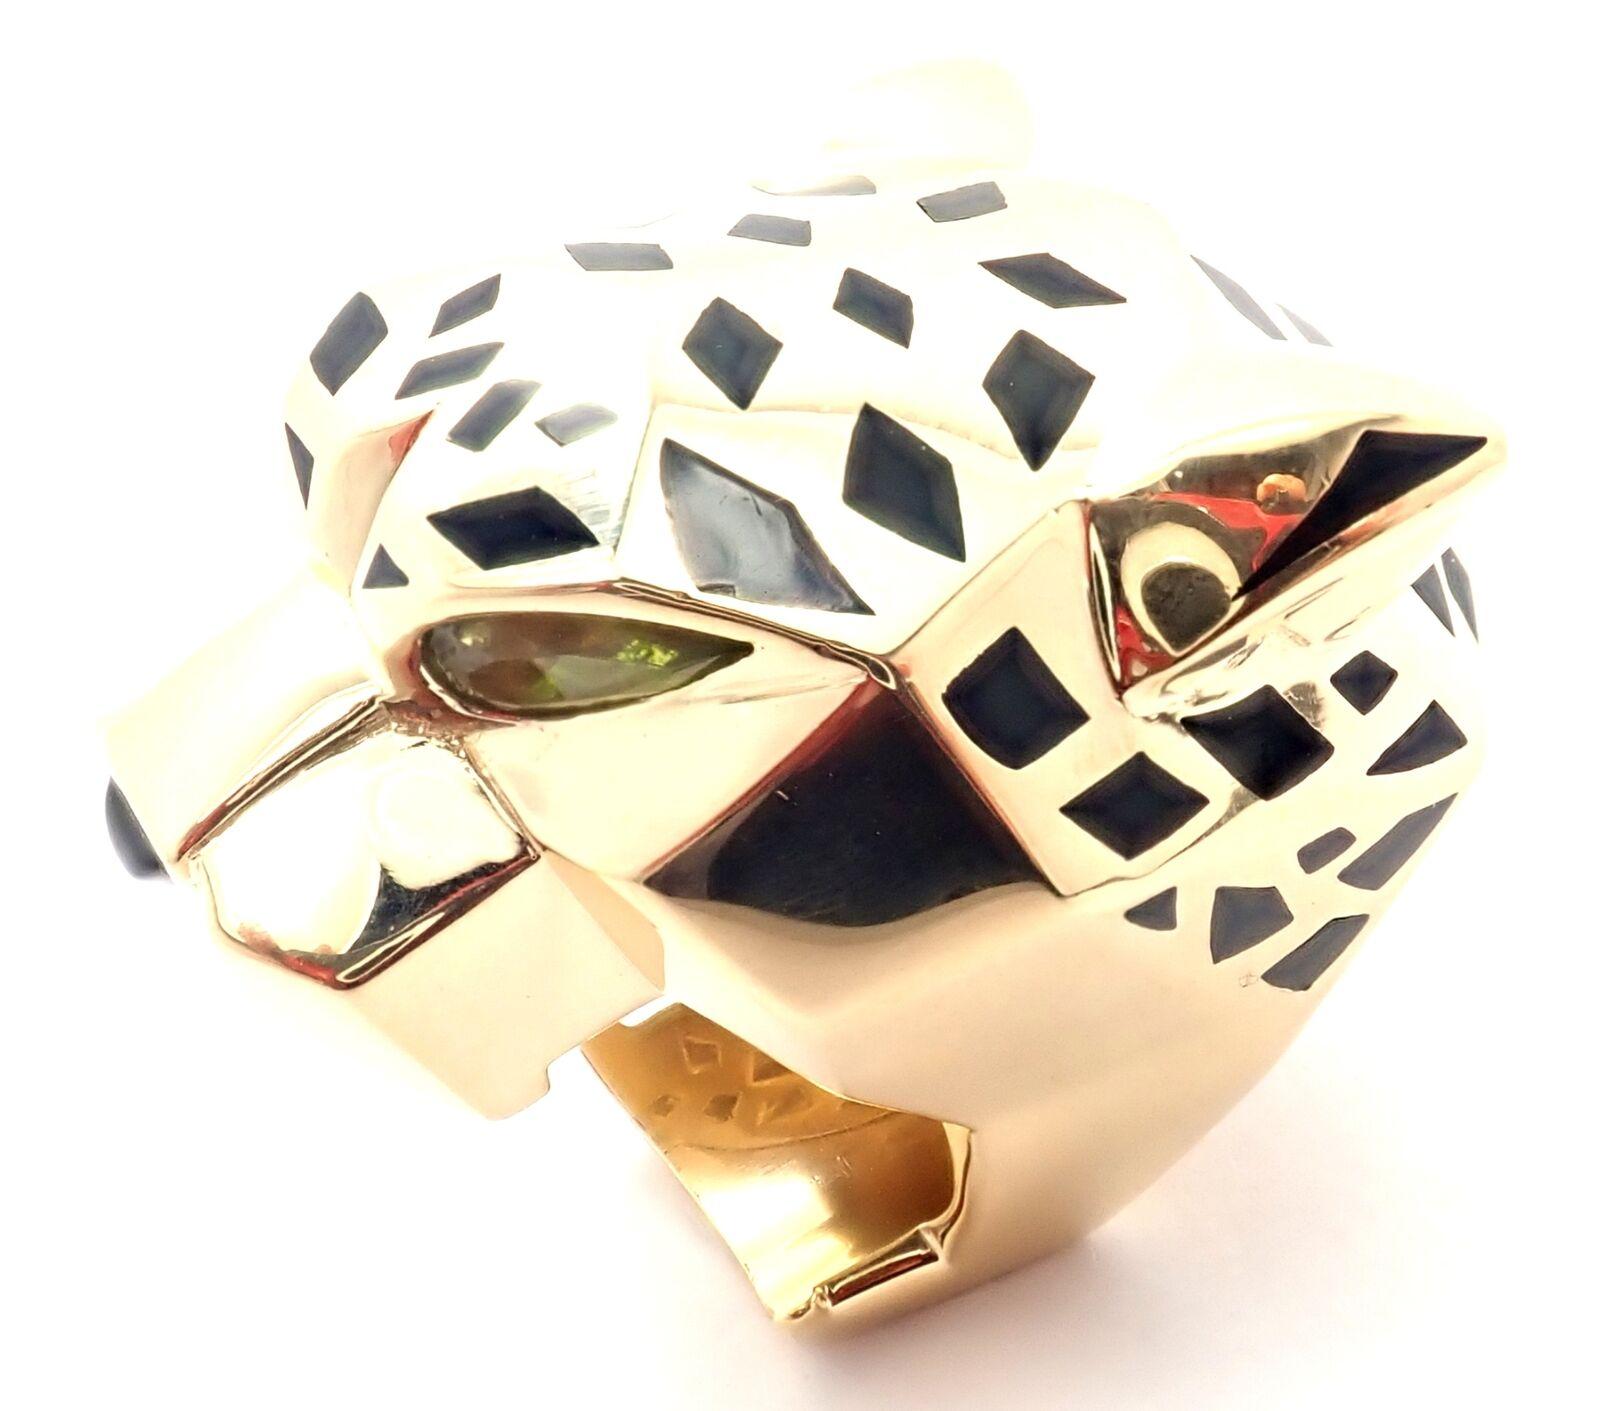 18k Yellow Gold Panther Peridot, Onyx, and Lacquer Ring by Cartier. 
From Cartier's 